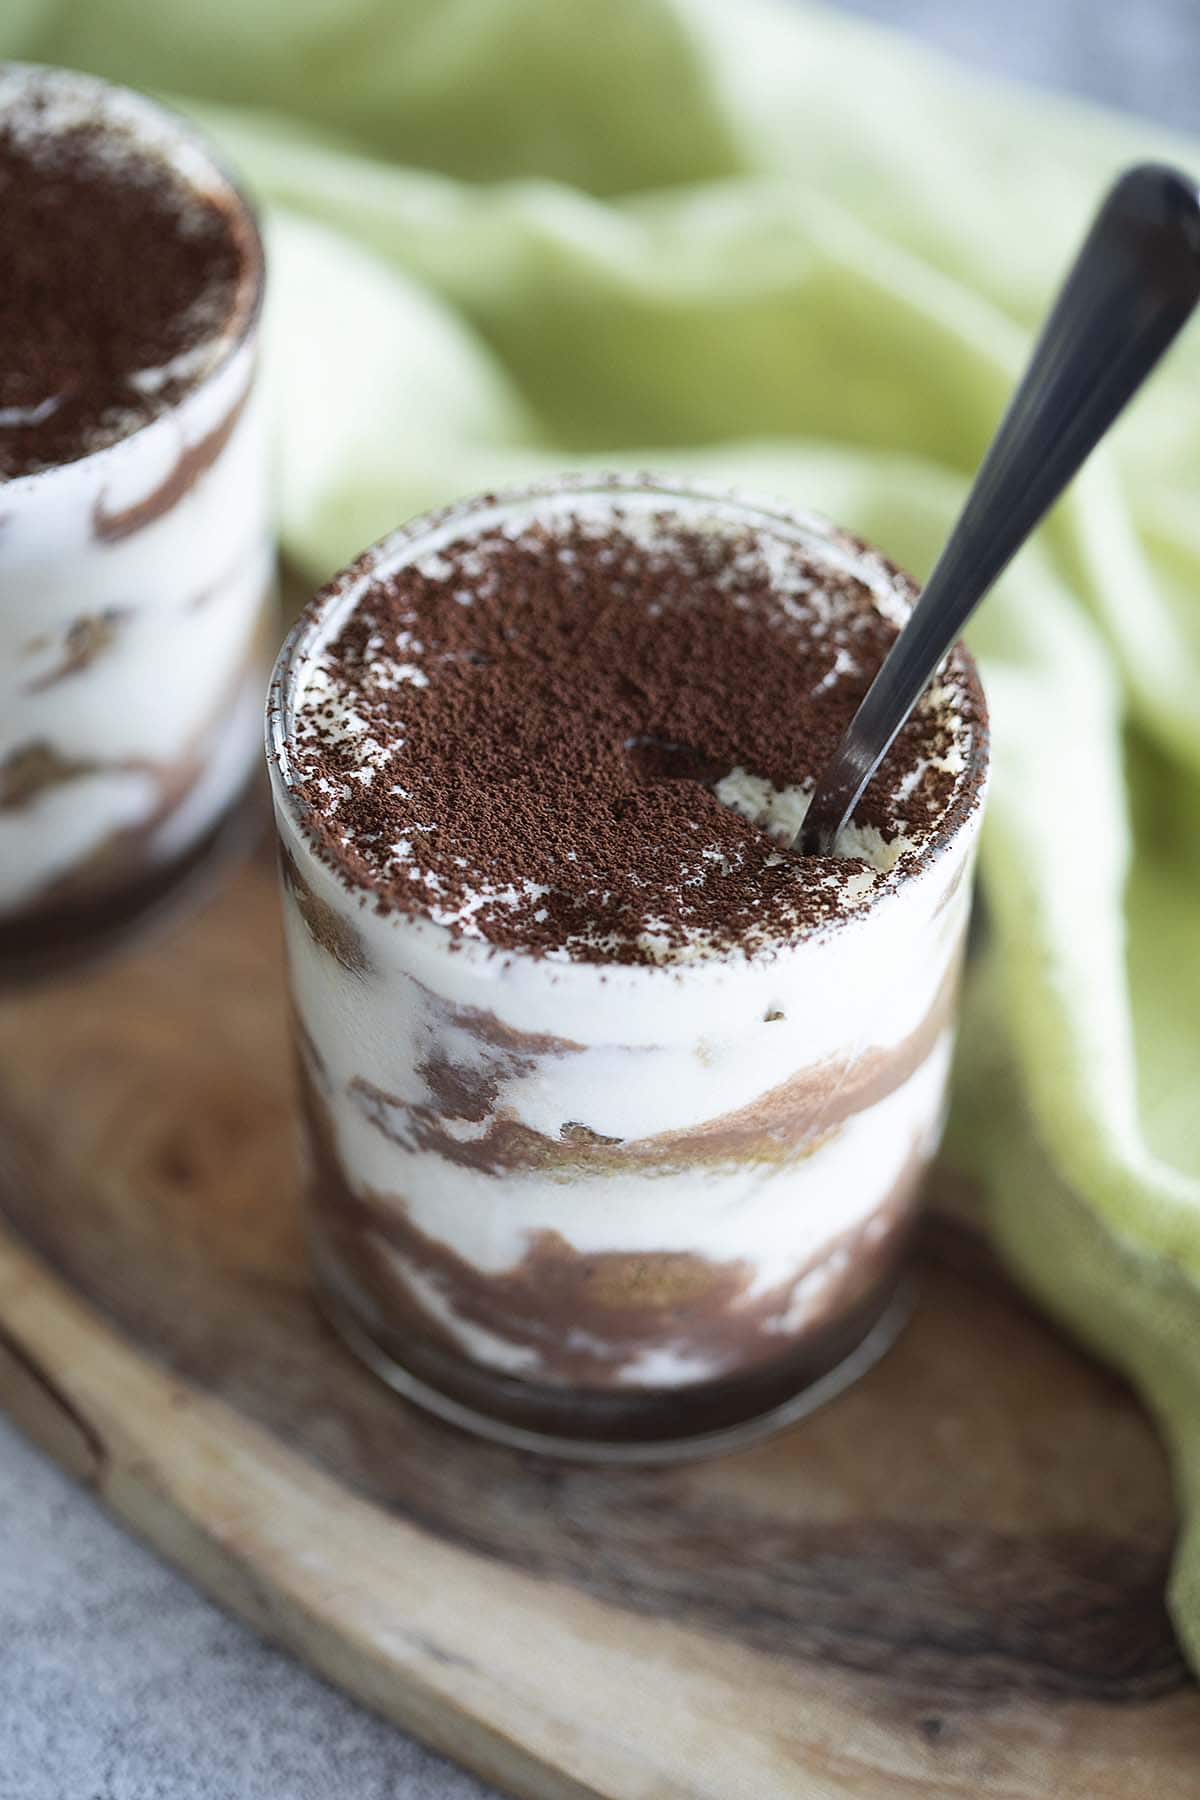 Eggless Tiramisu dessert, beautifully presented and ready to be enjoyed, featuring layers of creamy goodness and coffee-soaked ladyfingers.